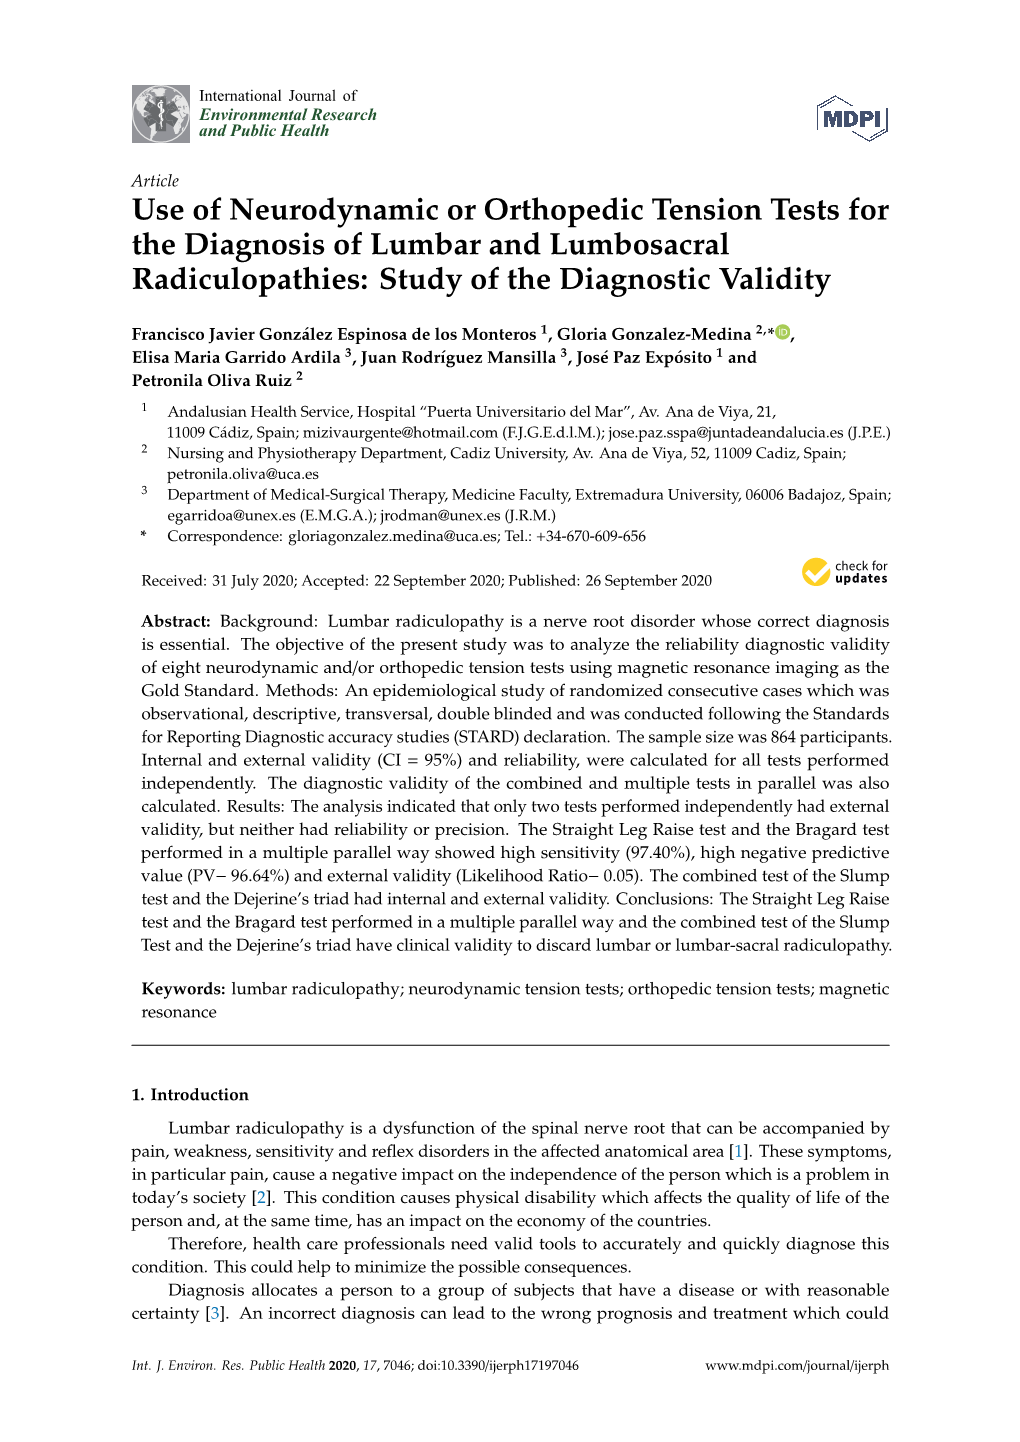 Use of Neurodynamic Or Orthopedic Tension Tests for the Diagnosis of Lumbar and Lumbosacral Radiculopathies: Study of the Diagnostic Validity